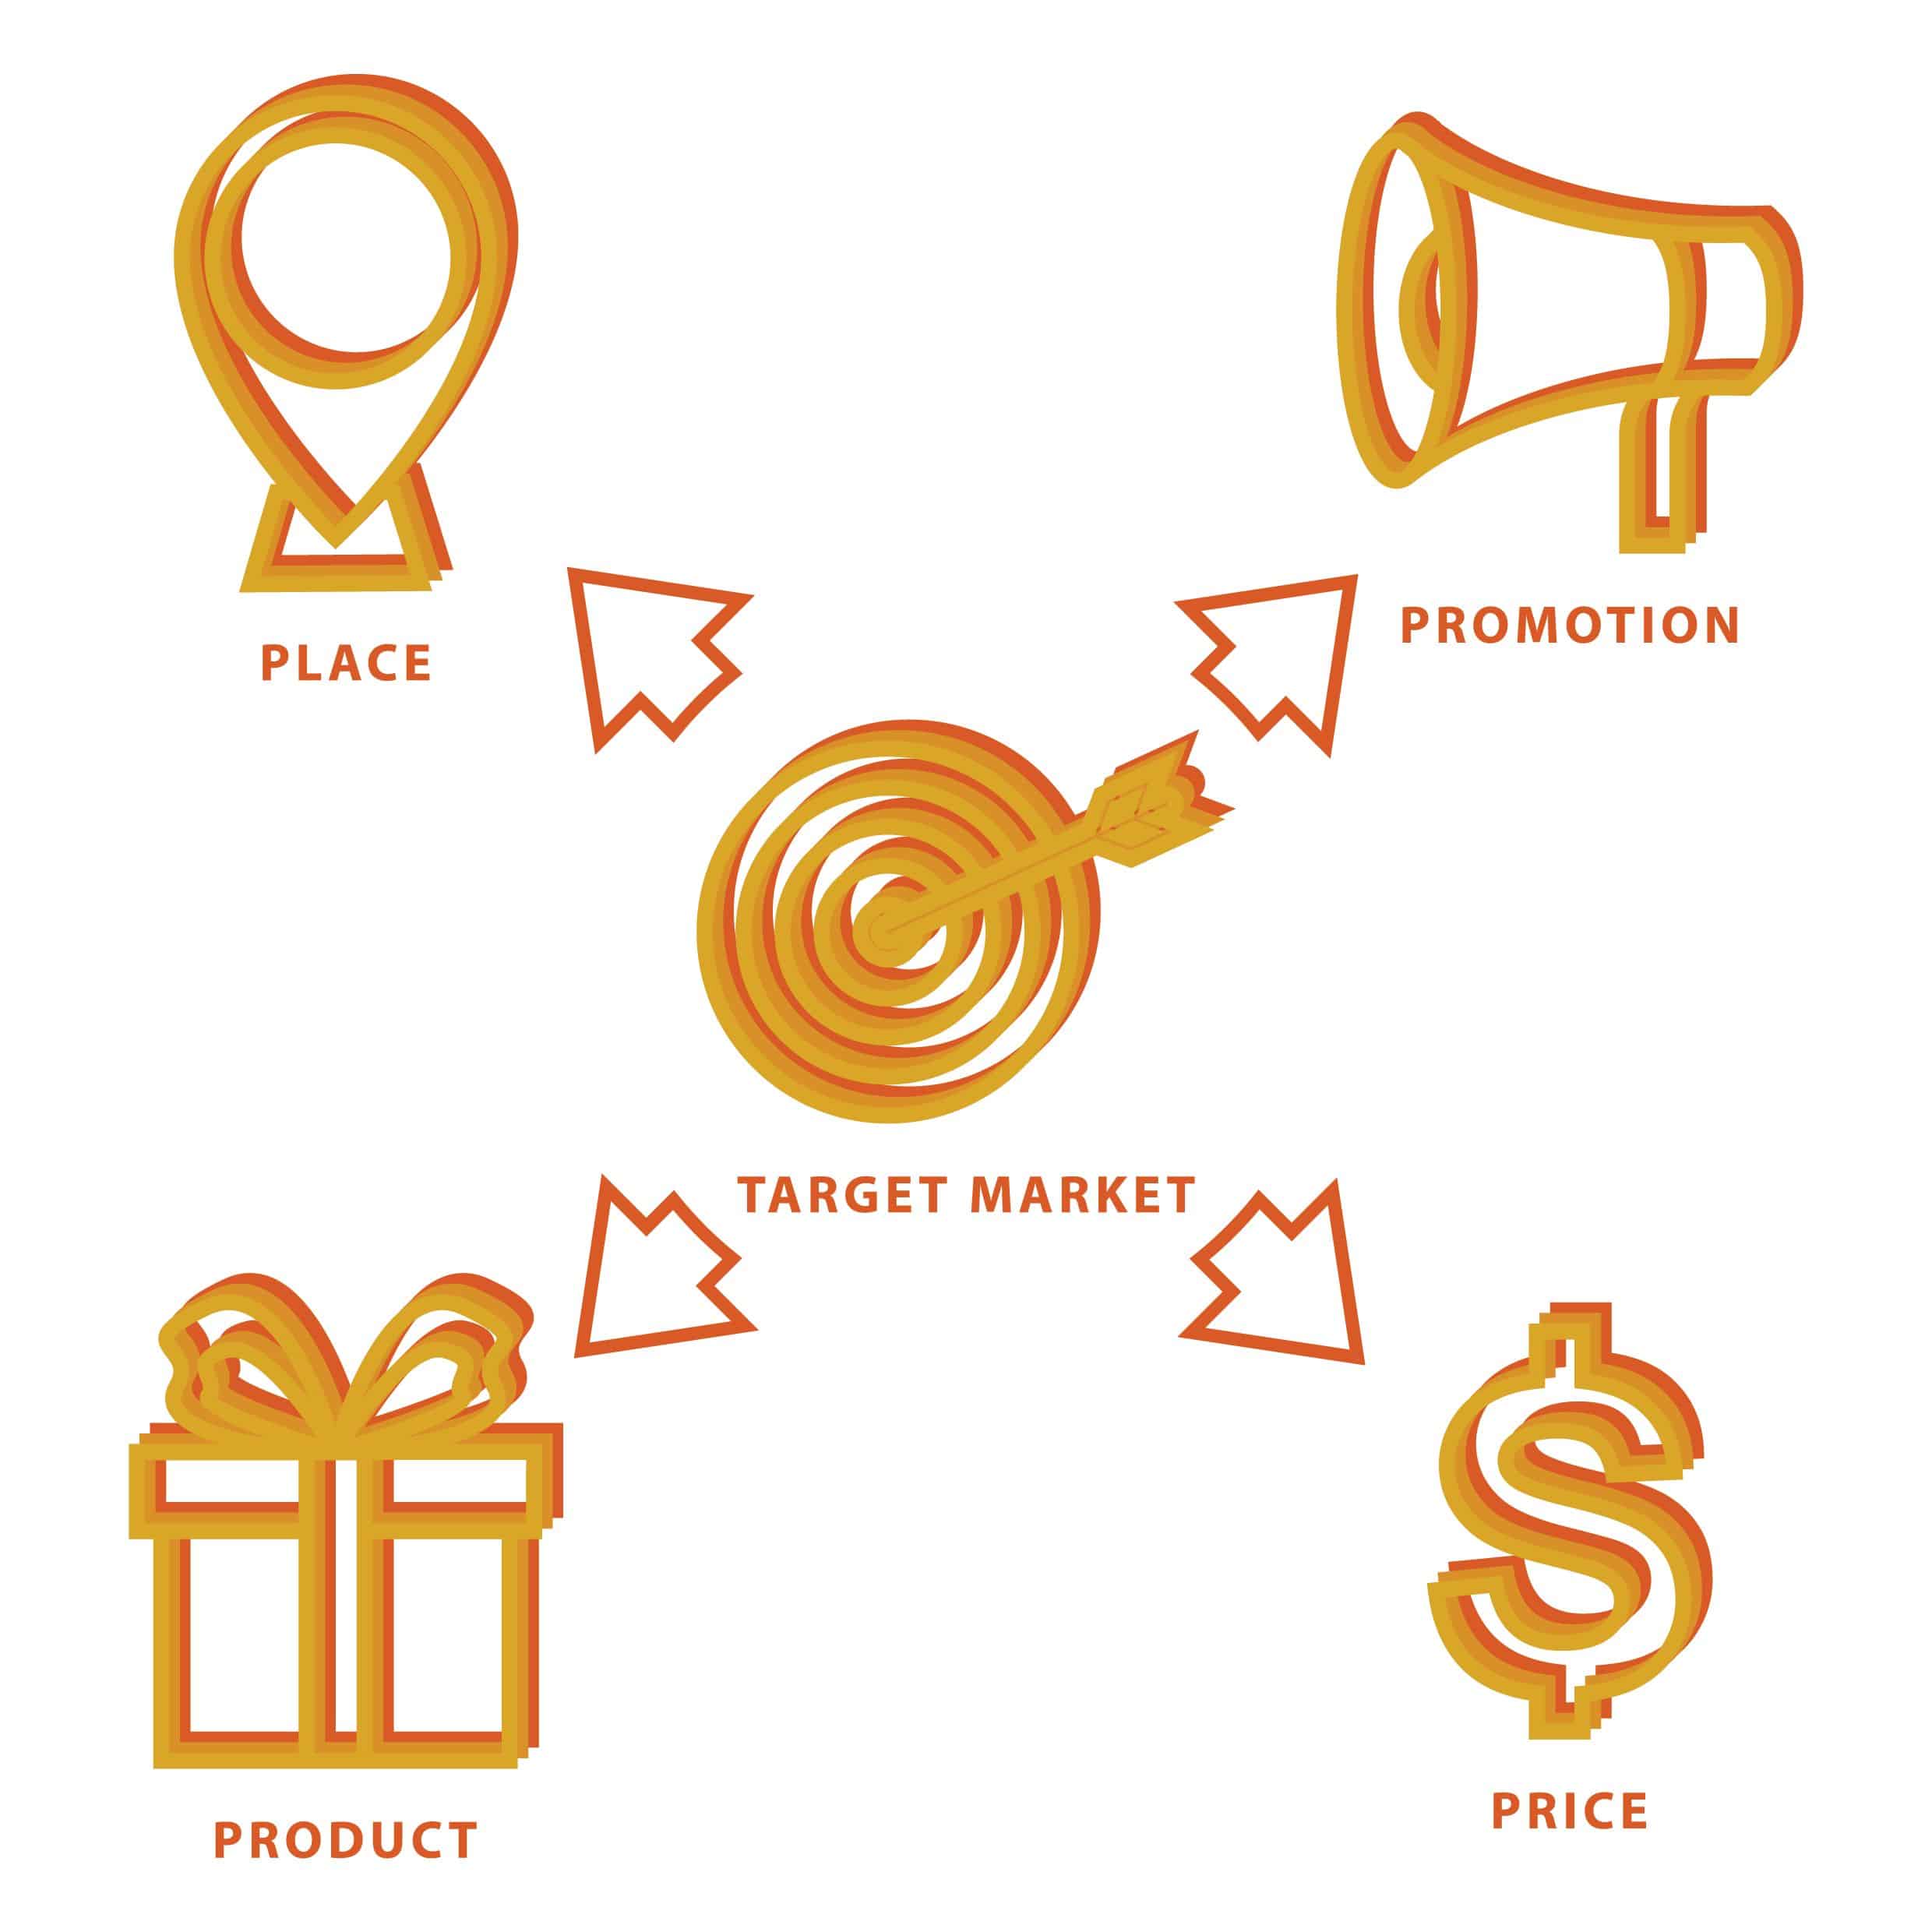 product price place promotion - provid films marketing infographic